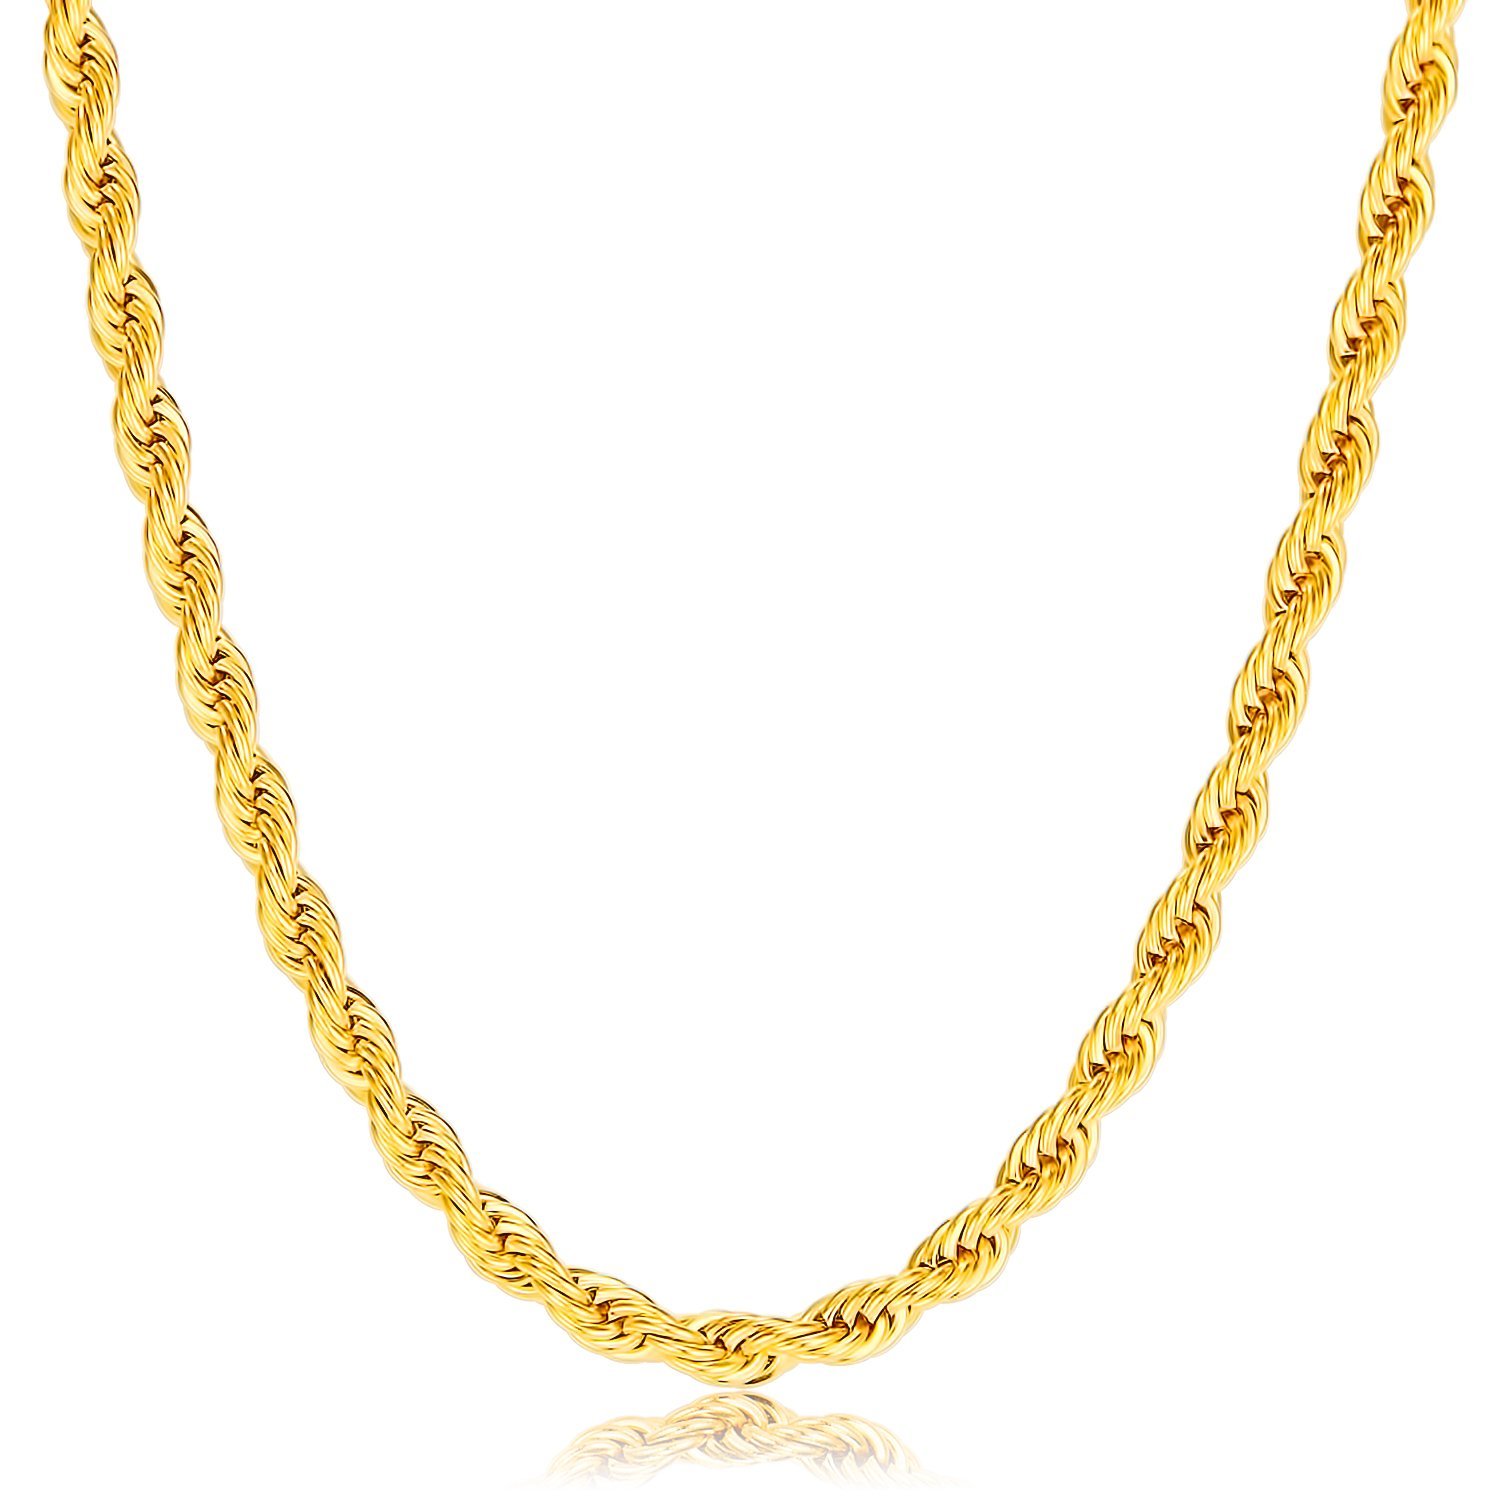 Jewelers 14K Solid Gold 4MM Rope Chain Necklace BOXED - image 1 of 3